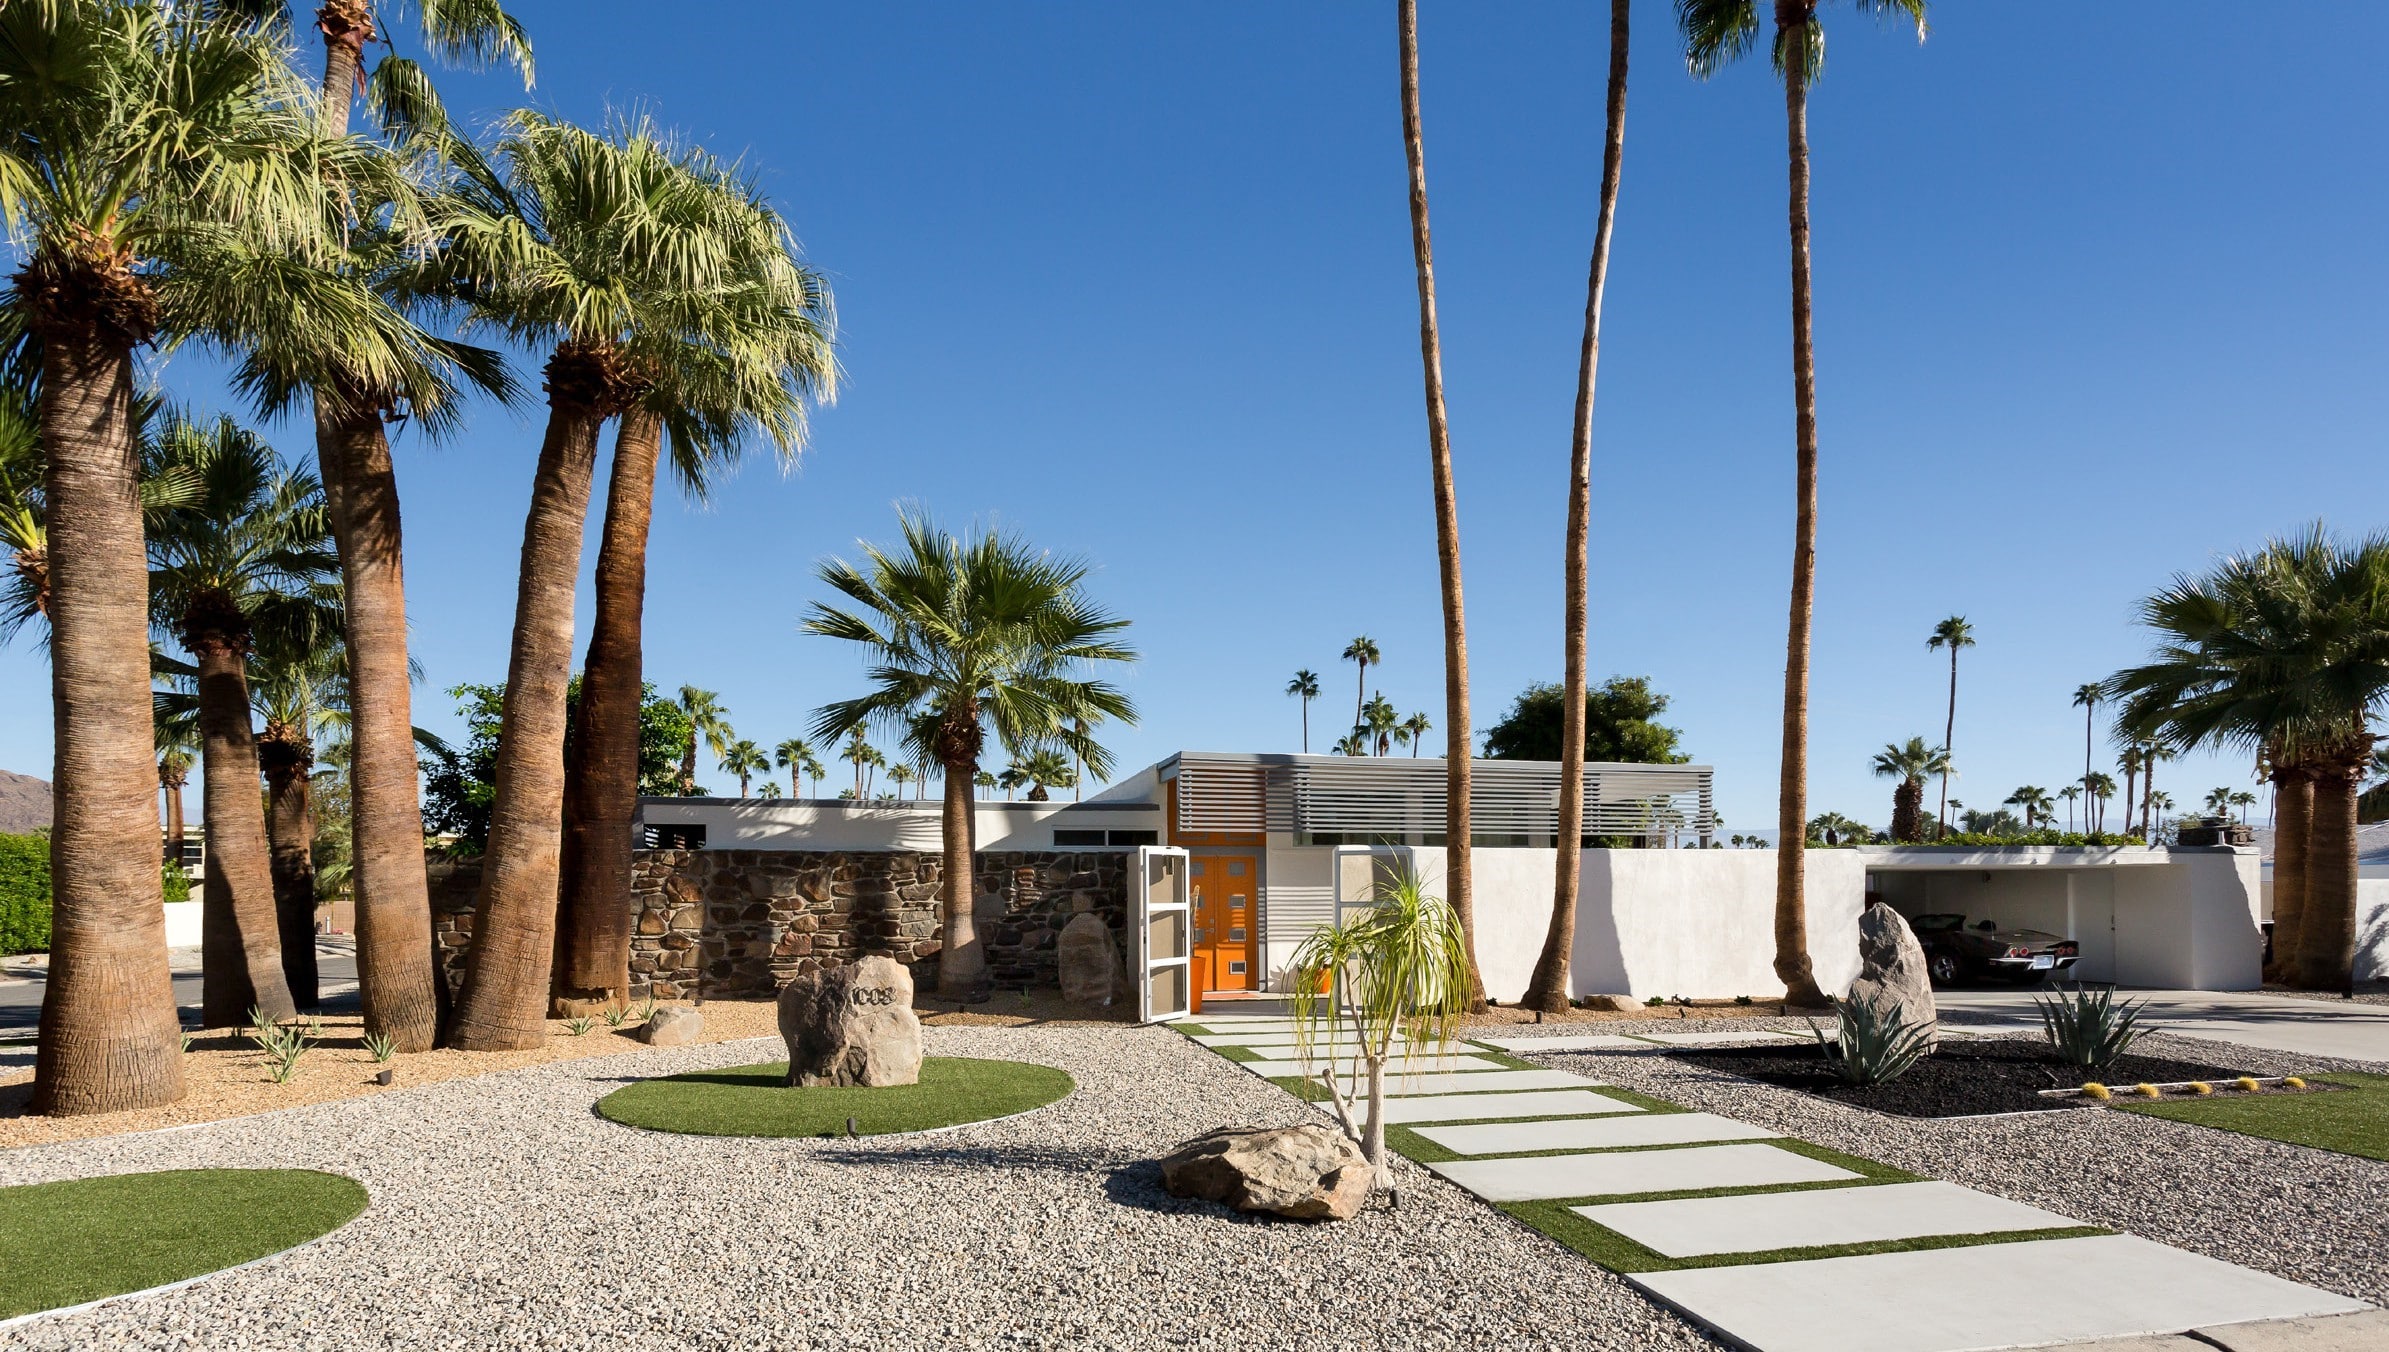 Modern house with a flat roof and large windows, flanked by tall palm trees, featuring a landscaped front yard with gravel, green grass accents, and stepping stones leading to an orange front door.